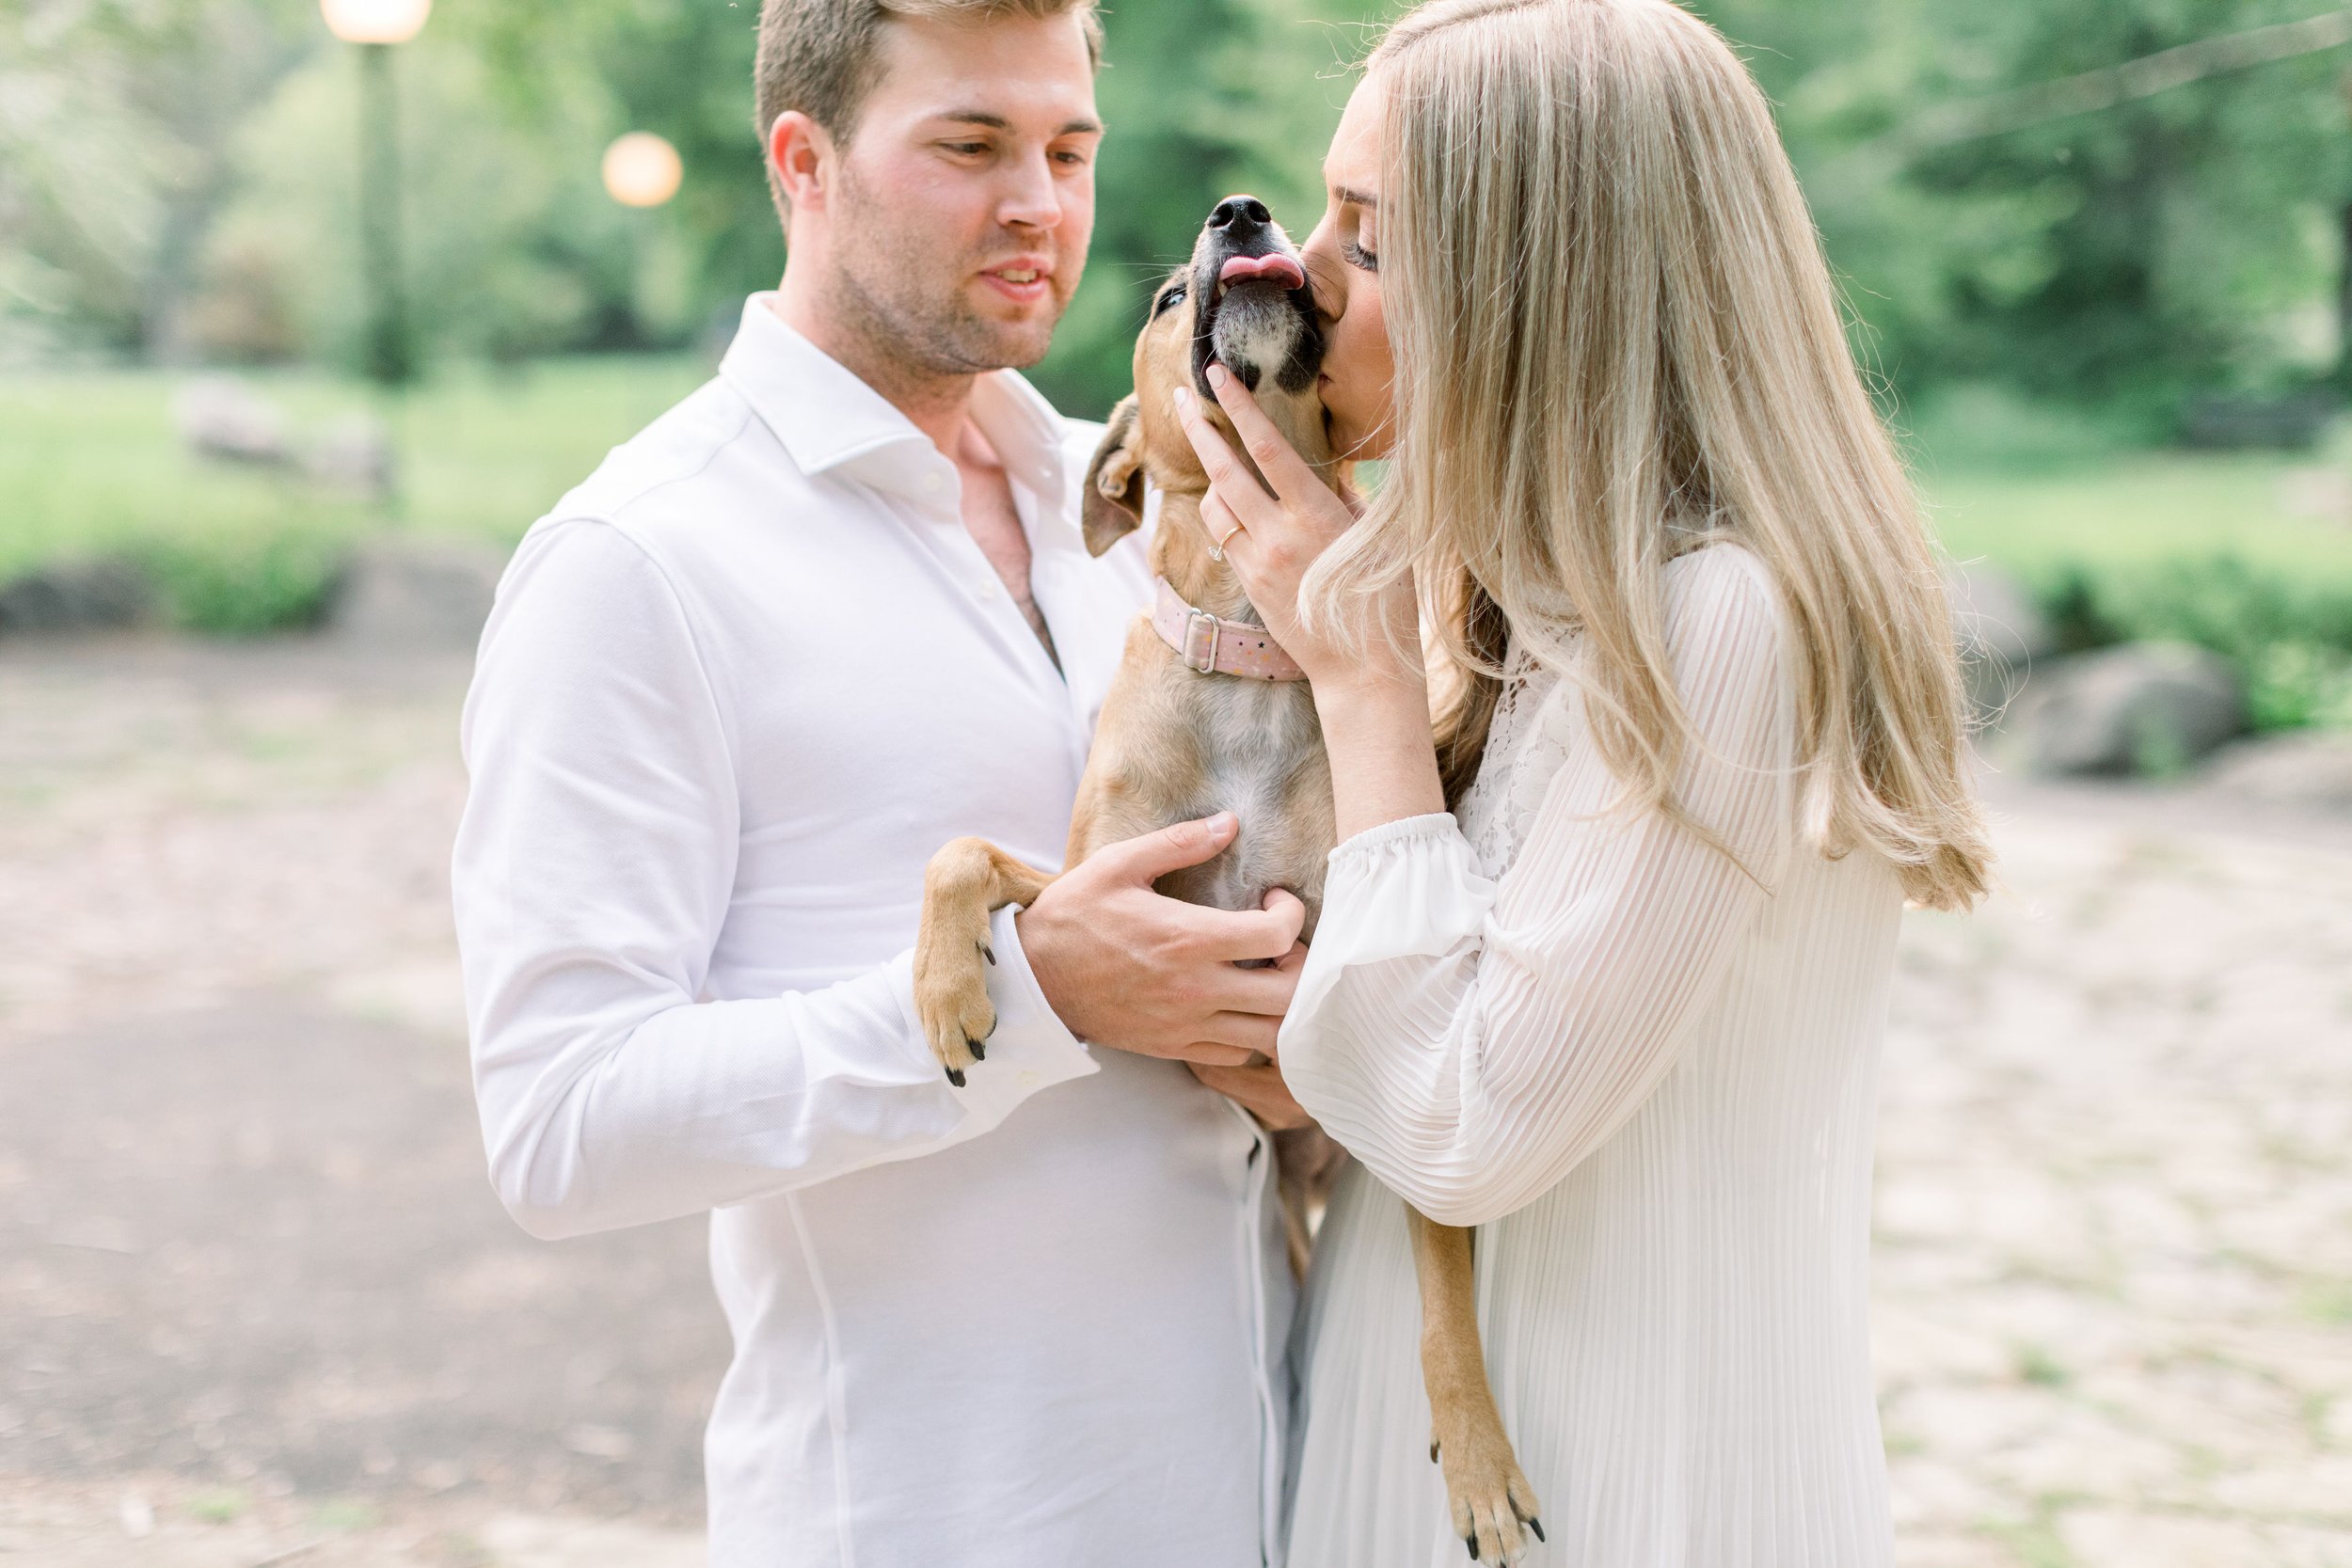  In an Ottawa park, a woman gives her dog a kiss captured by Chelsea mason photography. woman dog kisses style ideas matching #Ottawaengagements #Ottawaweddingphotographers #engagementwithdogs #ChelseaMasonPhotography #ChelseaMasonEngagements  